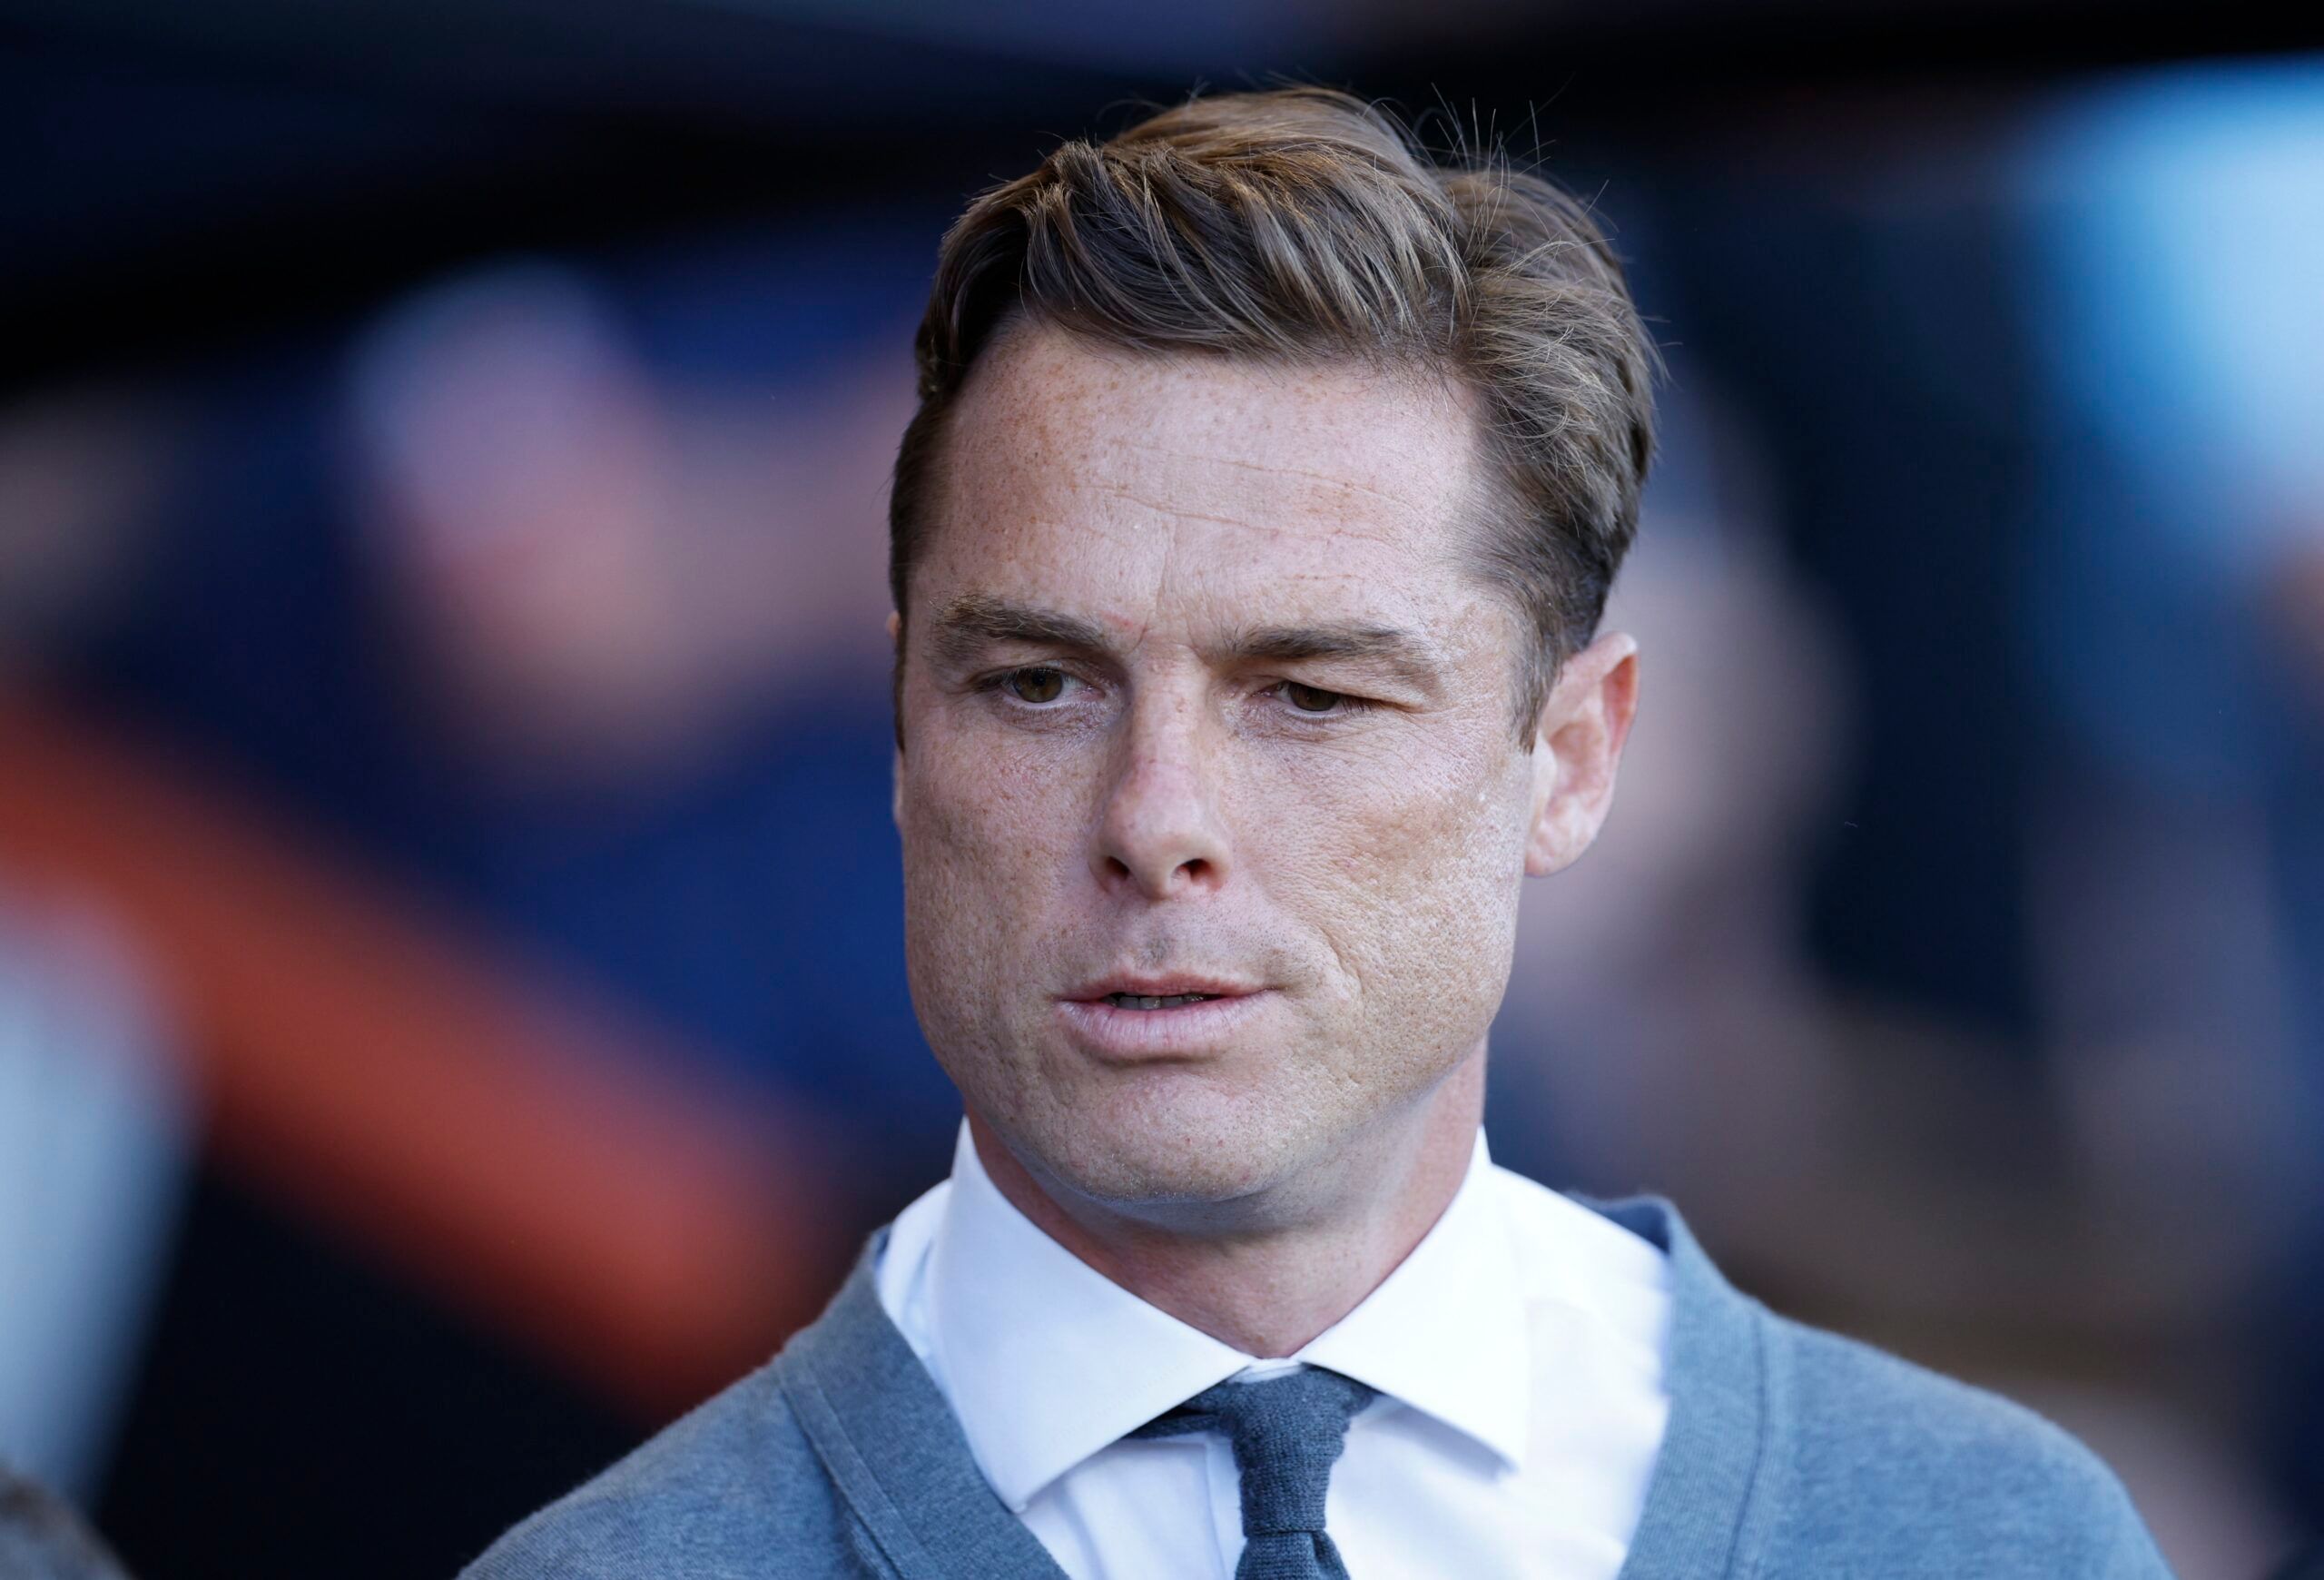 Soccer Football - Premier League - AFC Bournemouth v Arsenal - Vitality Stadium, Bournemouth, Britain - August 20, 2022 AFC Bournemouth manager Scott Parker before the match Action Images via Reuters/John Sibley EDITORIAL USE ONLY. No use with unauthorized audio, video, data, fixture lists, club/league logos or 'live' services. Online in-match use limited to 75 images, no video emulation. No use in betting, games or single club /league/player publications.  Please contact your account representa